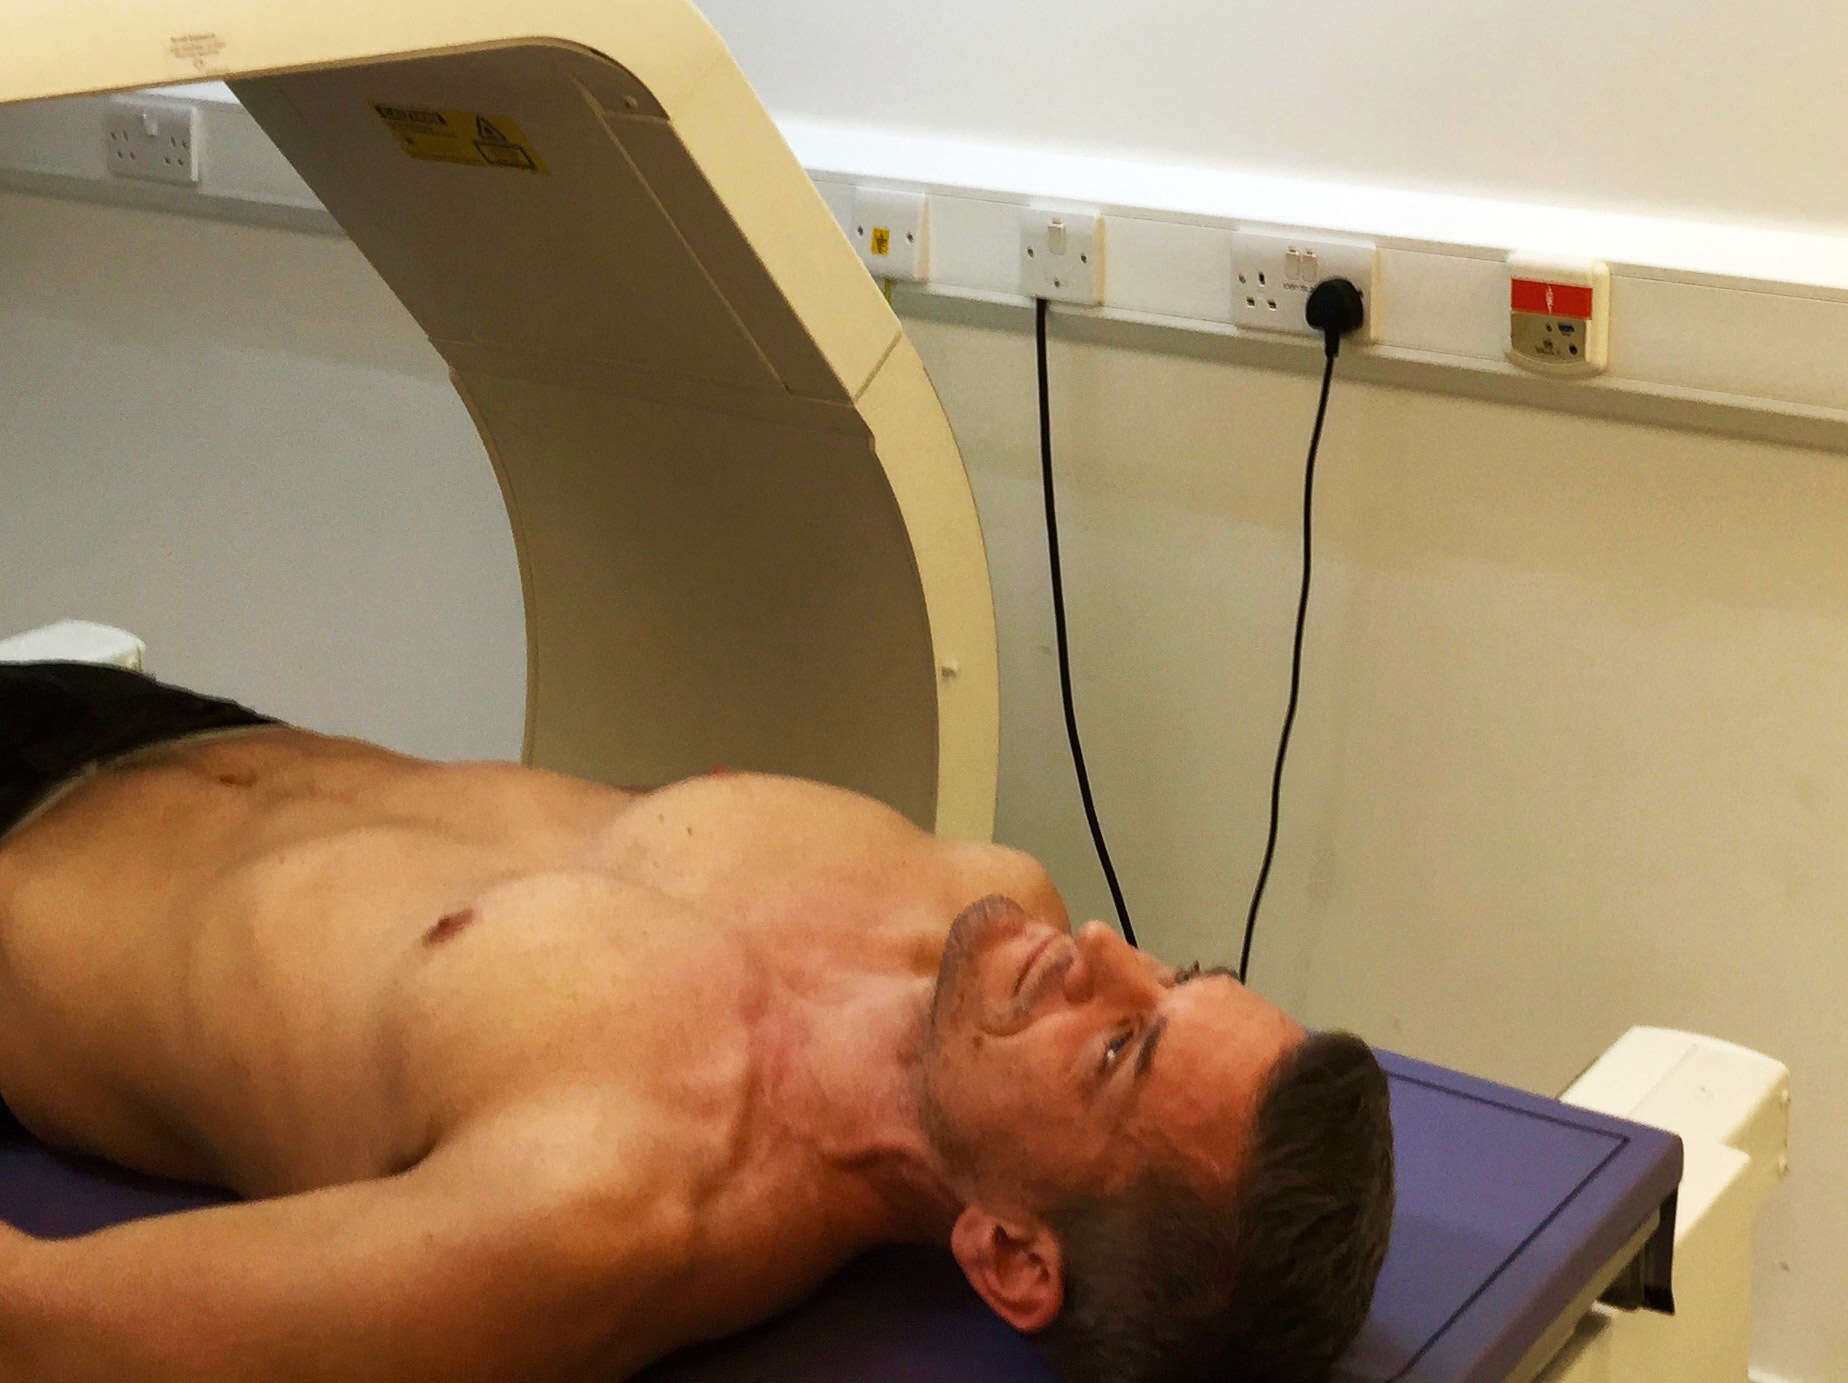 Getting a DEXA scan from Bodyscan is easy. You just lie there..